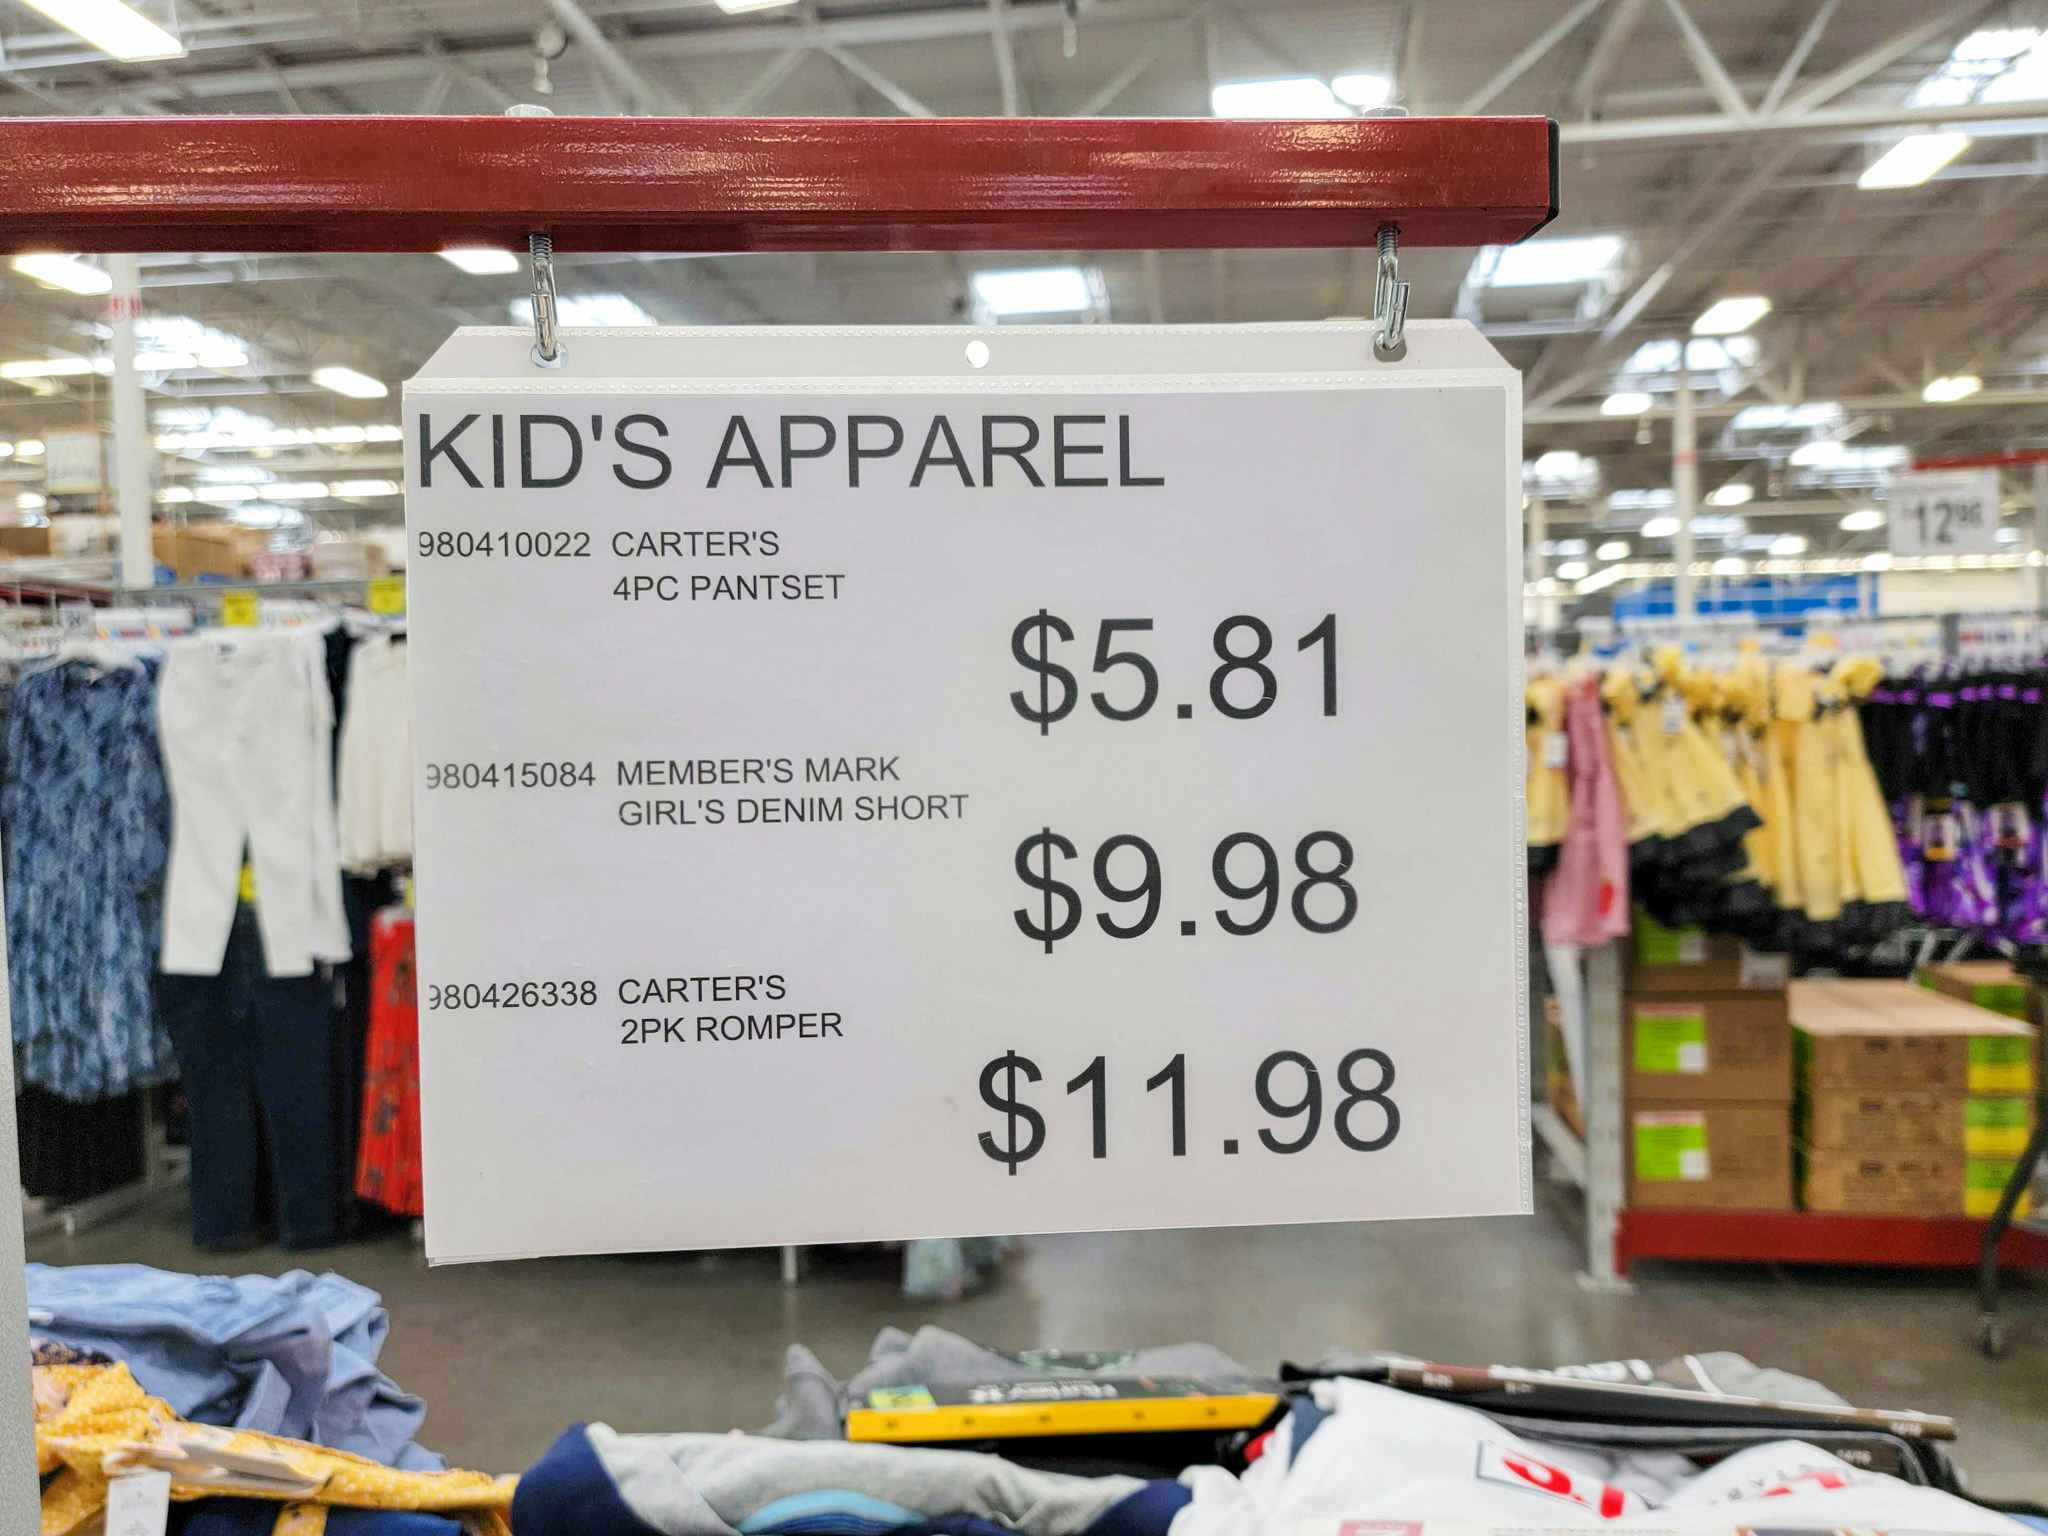 clearance sign for 5.81 carters outfit sets